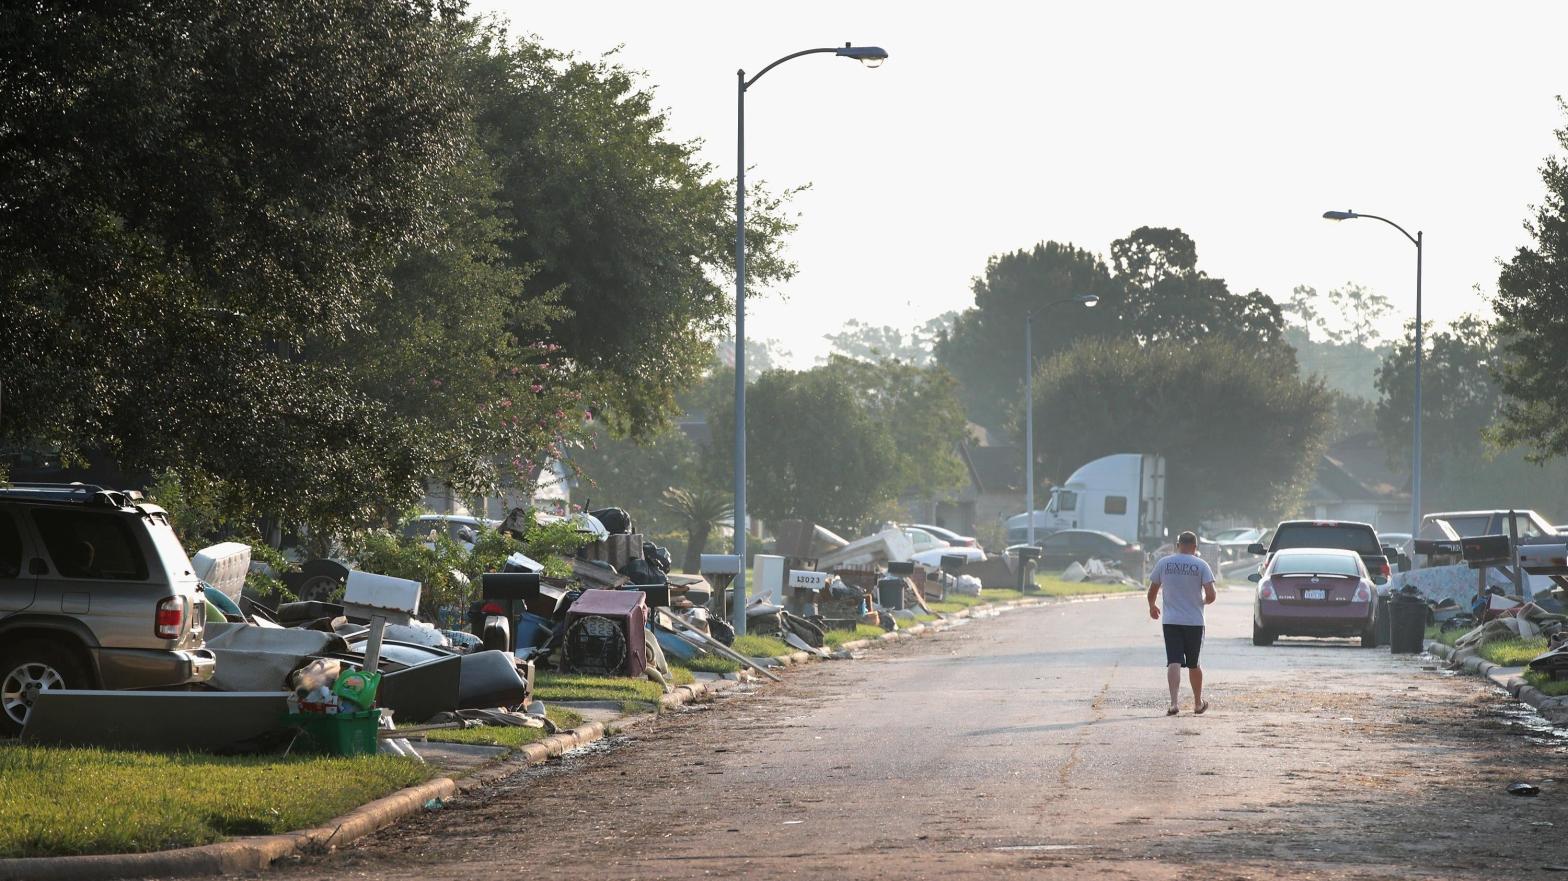 A person walks down a street as residents begin the process of cleaning up the damage to their property after torrential rains caused widespread flooding during Hurricane and Tropical Storm Harvey on September 1, 2017 in Houston, Texas. (Photo: Scott Olson, Getty Images)